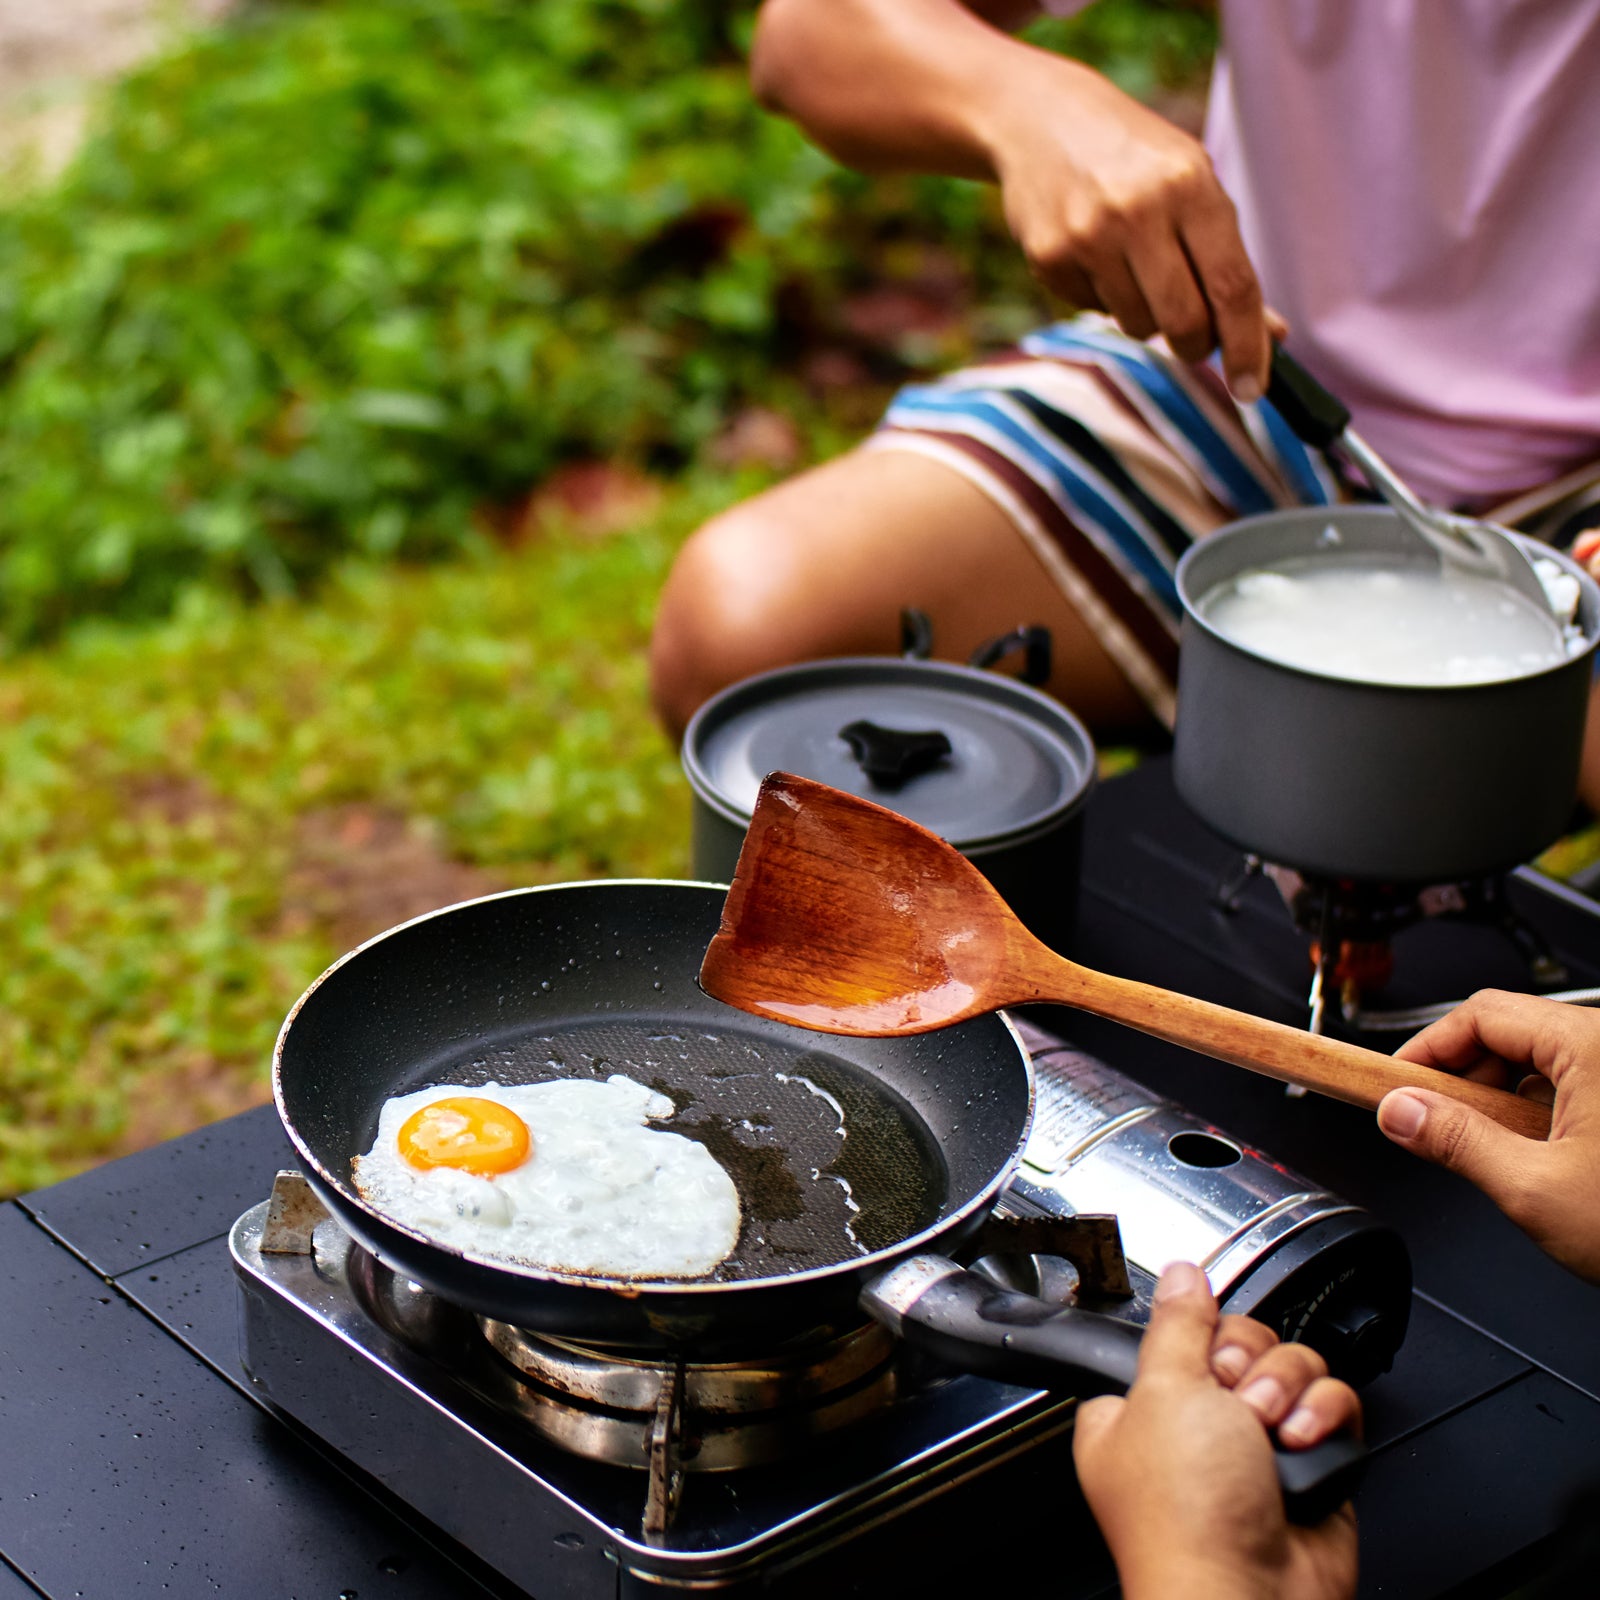 Ready to cook outdoors? Here are some do's and don'ts for cleaning